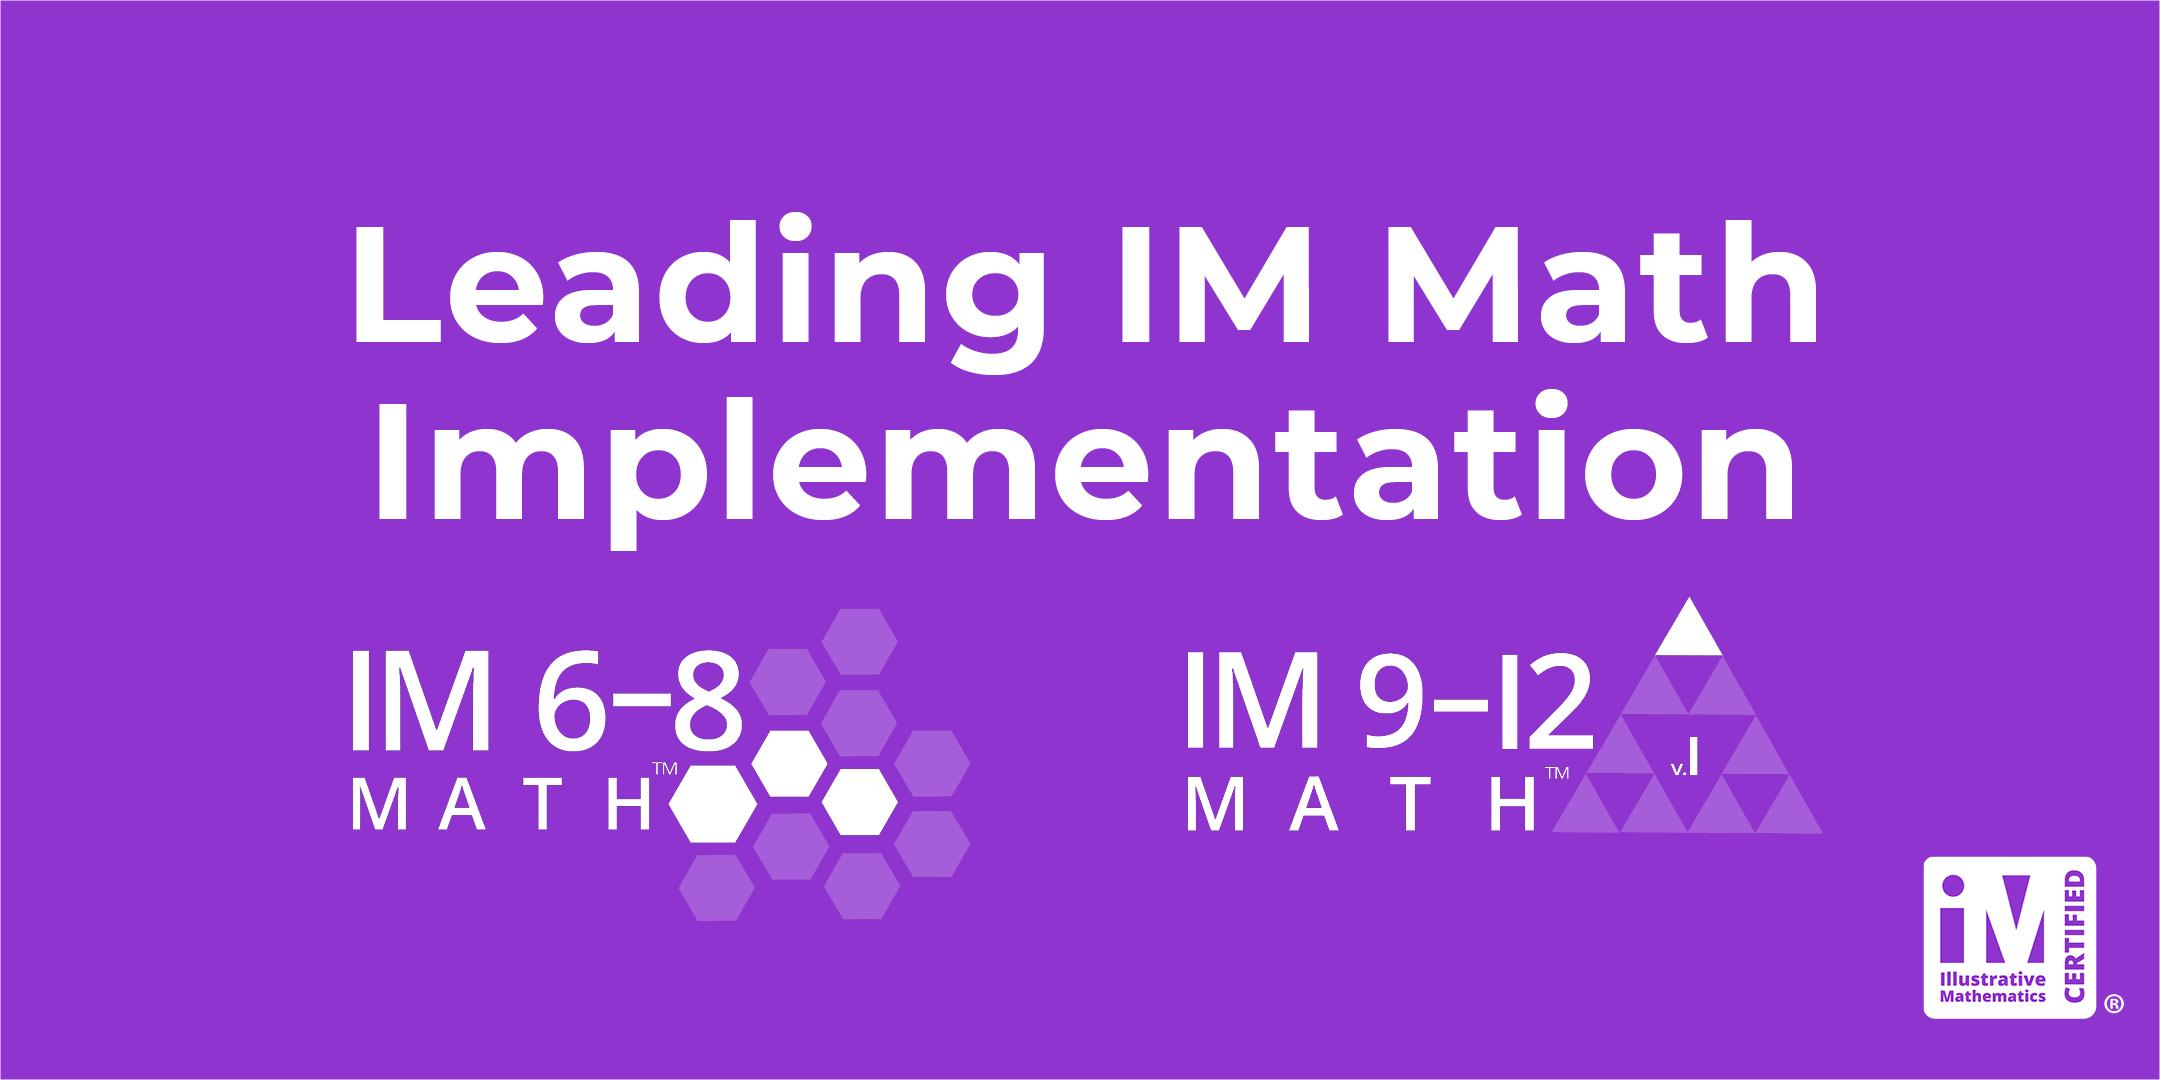 IM Professional Learning for leaders who have adopted IM 6-12 Math and are preparing to support implementation.